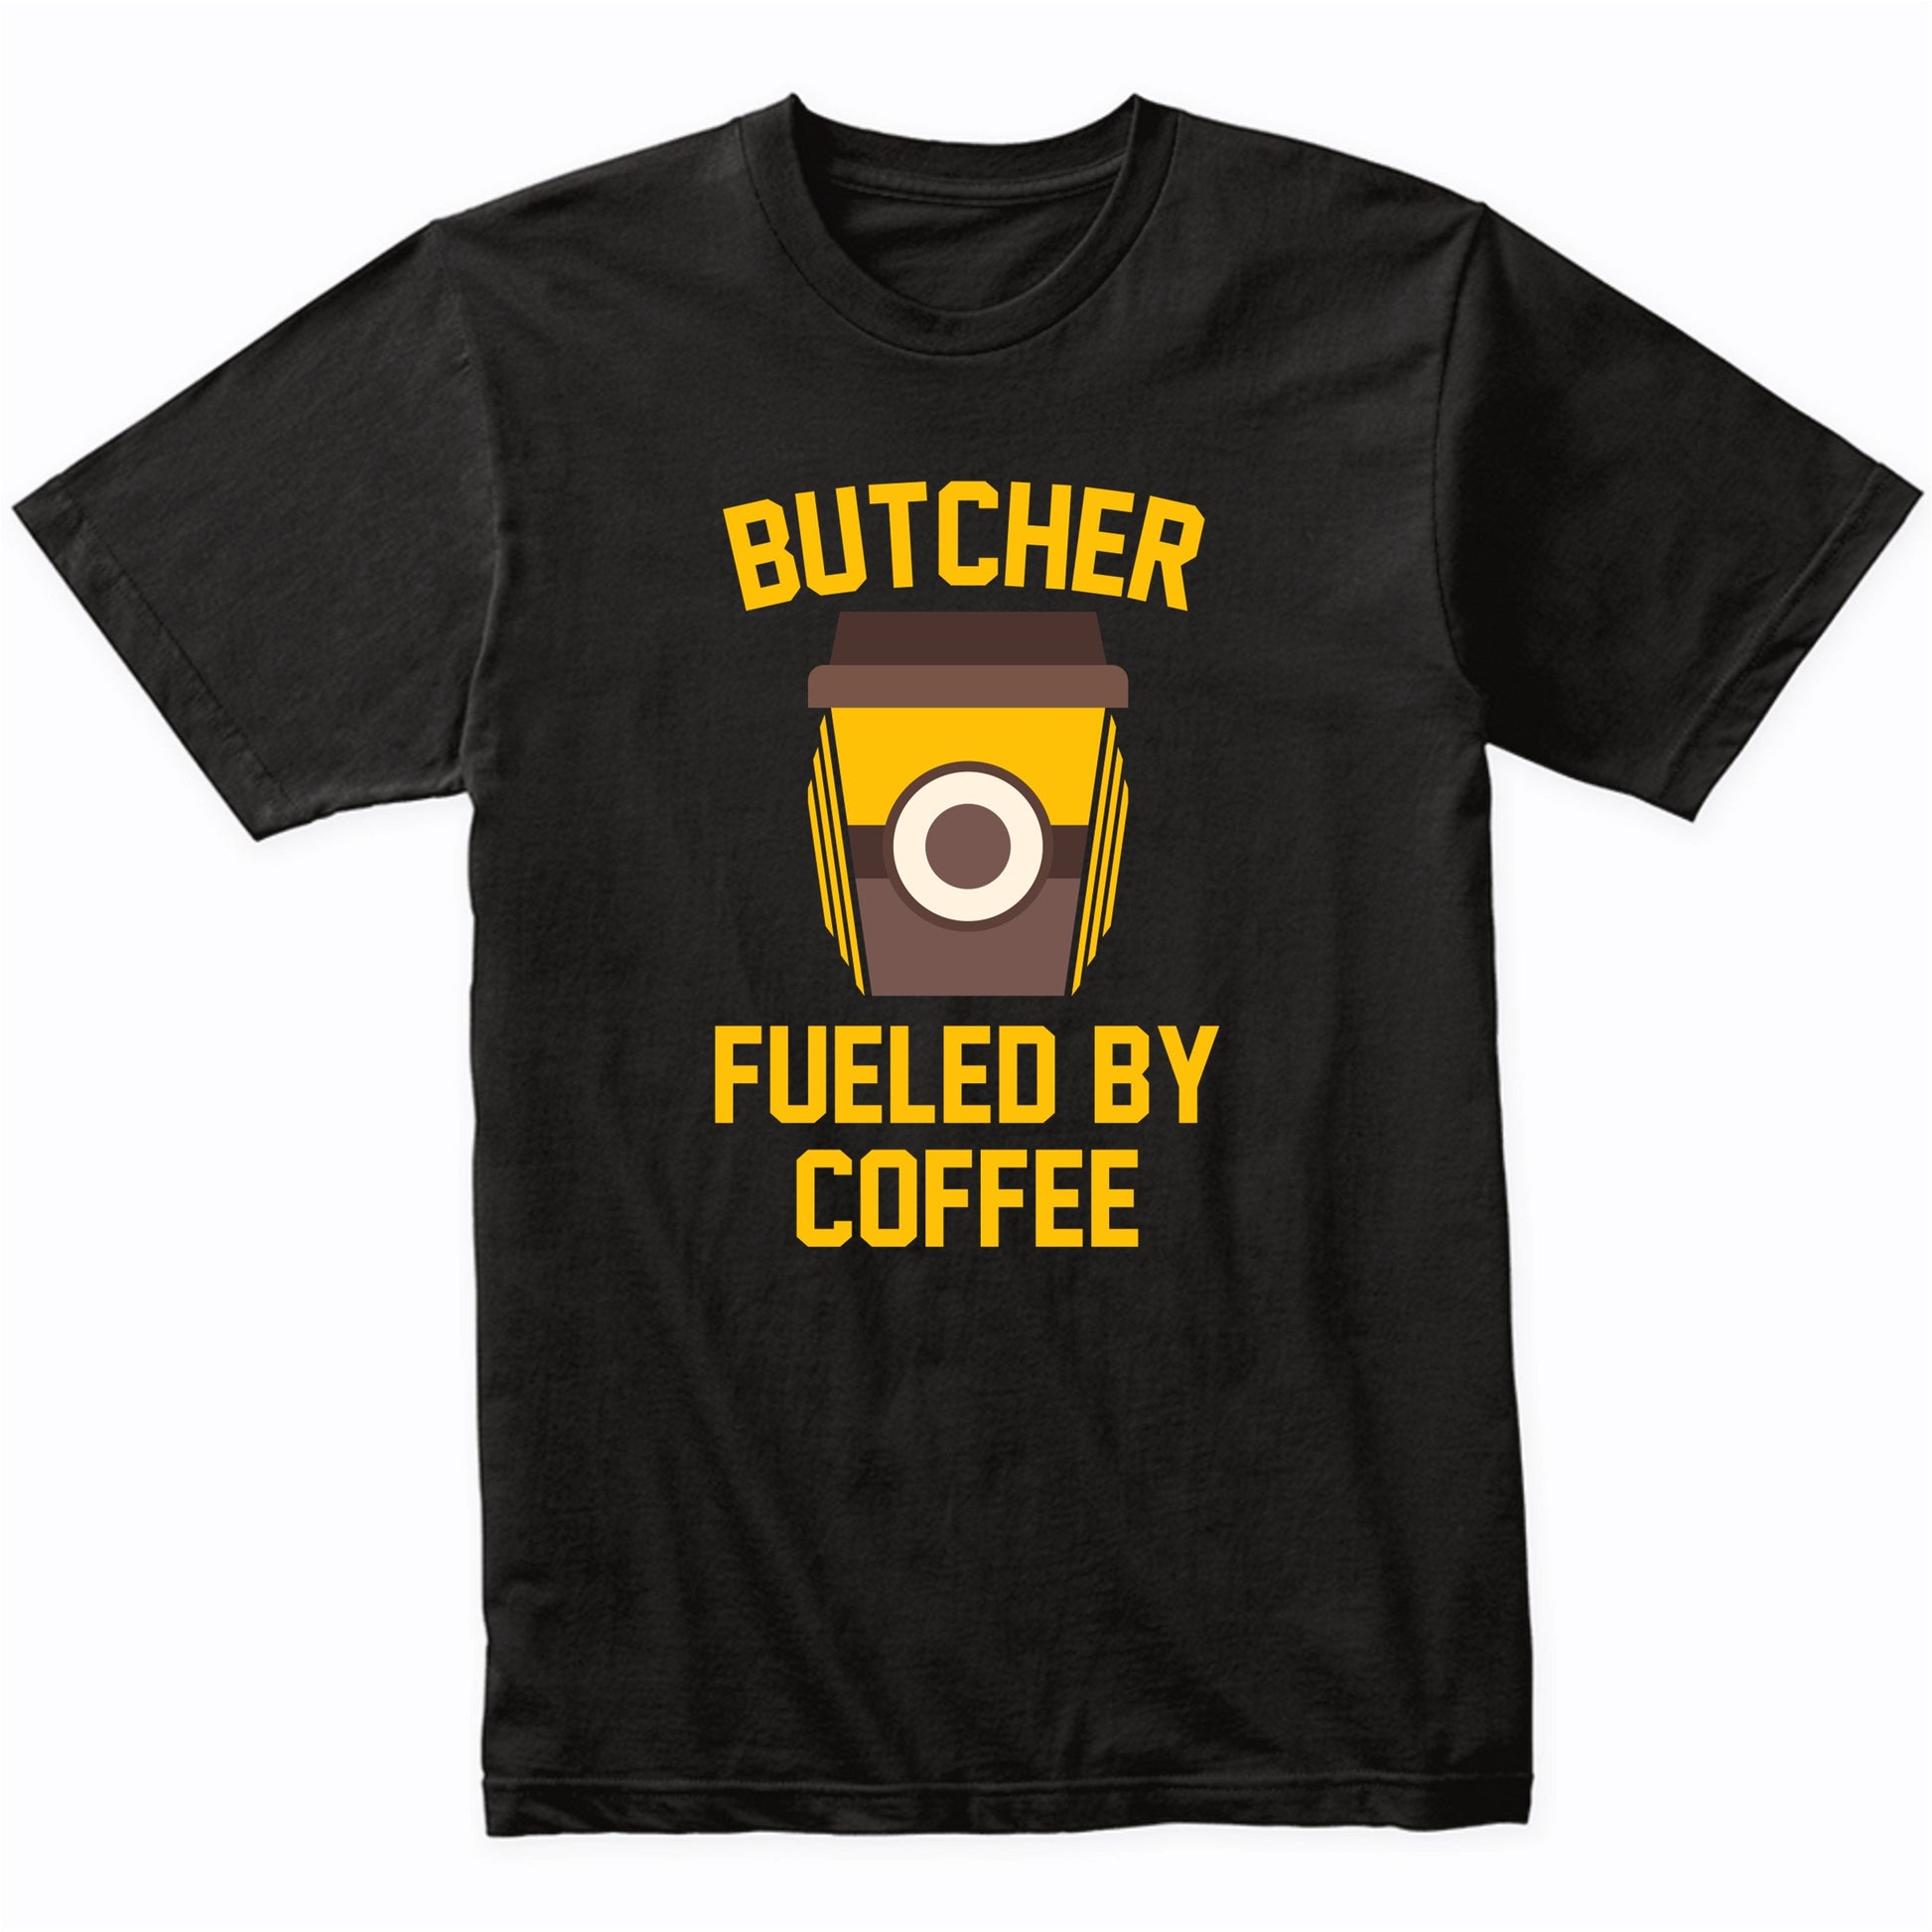 Butcher Fueled By Coffee Funny Shirt